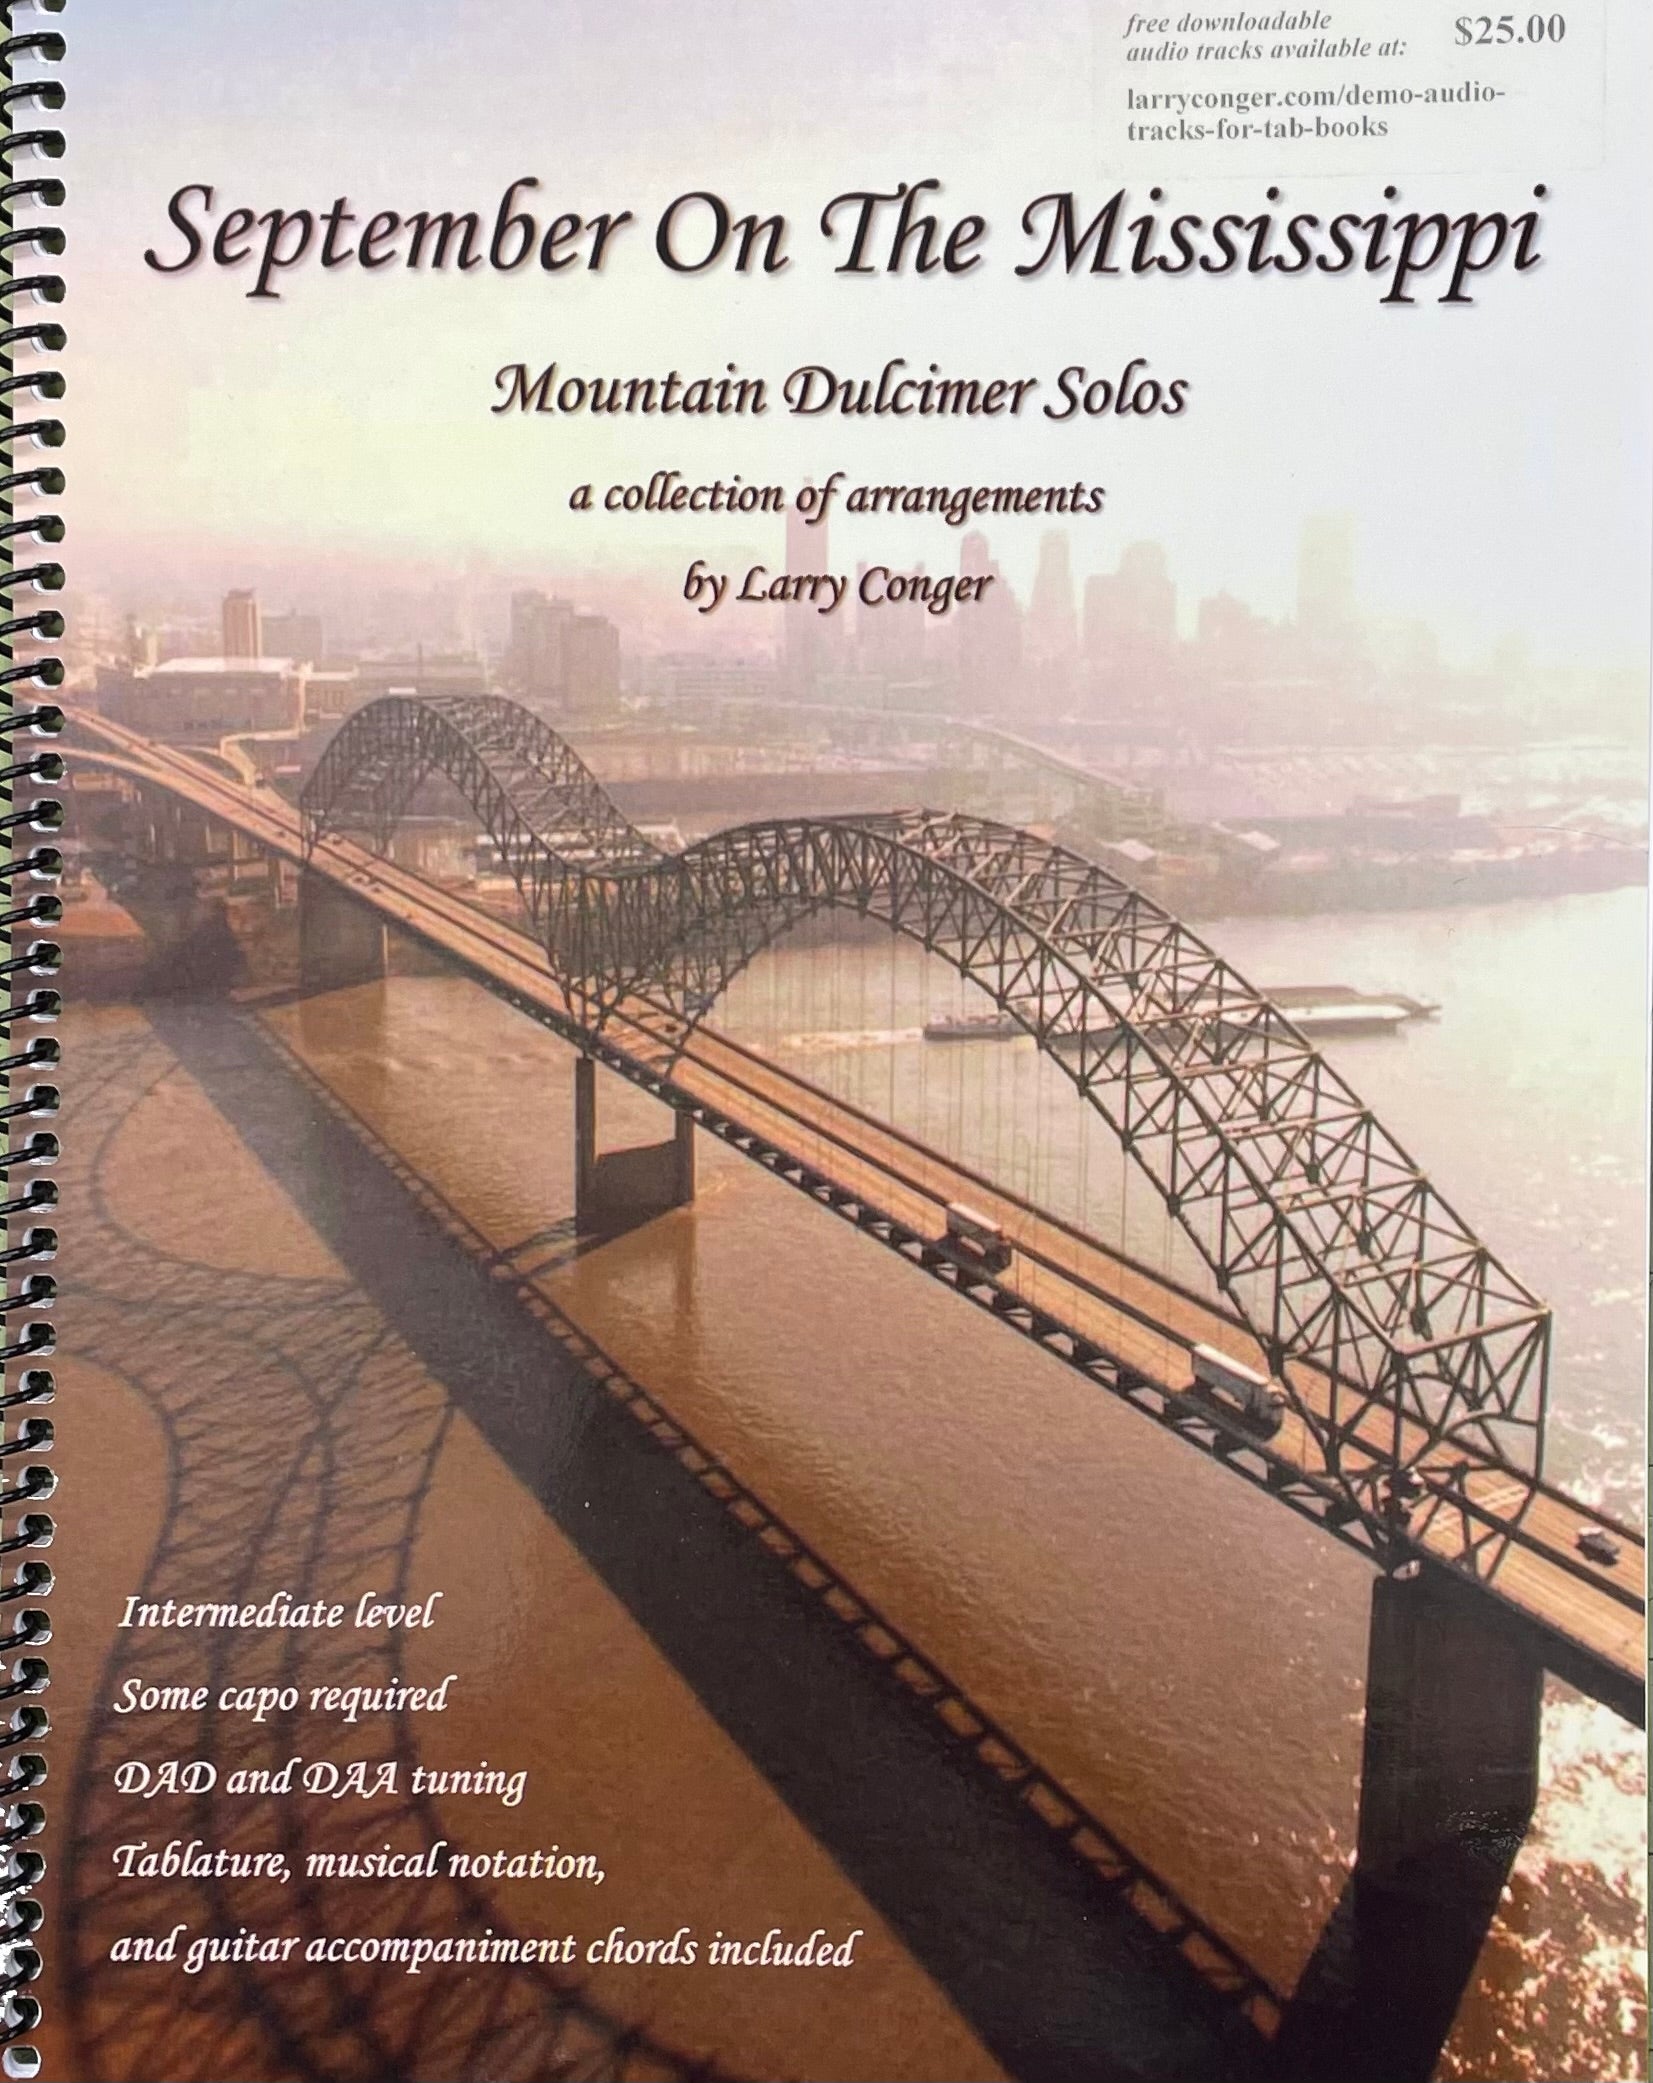 Cover of the product 'September on the Mississippi Mountain Dulcimer Solos by Larry Conger', featuring a photo of a bridge over a river